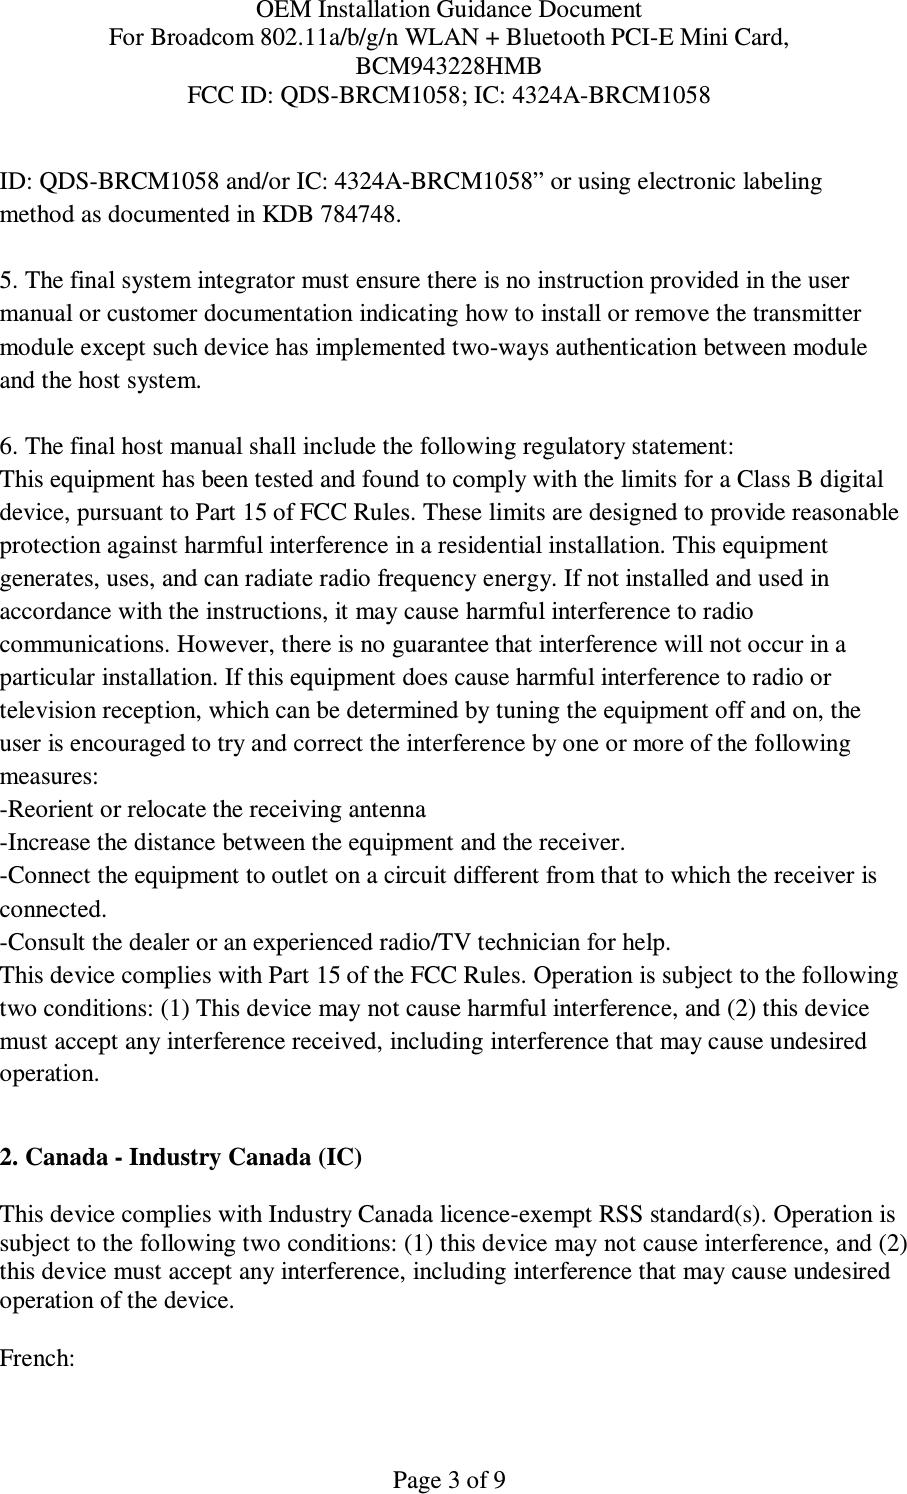 OEM Installation Guidance Document For Broadcom 802.11a/b/g/n WLAN + Bluetooth PCI-E Mini Card,  BCM943228HMB FCC ID: QDS-BRCM1058; IC: 4324A-BRCM1058   Page 3 of 9 ID: QDS-BRCM1058 and/or IC: 4324A-BRCM1058” or using electronic labeling method as documented in KDB 784748.  5. The final system integrator must ensure there is no instruction provided in the user manual or customer documentation indicating how to install or remove the transmitter module except such device has implemented two-ways authentication between module and the host system.  6. The final host manual shall include the following regulatory statement: This equipment has been tested and found to comply with the limits for a Class B digital device, pursuant to Part 15 of FCC Rules. These limits are designed to provide reasonable protection against harmful interference in a residential installation. This equipment generates, uses, and can radiate radio frequency energy. If not installed and used in accordance with the instructions, it may cause harmful interference to radio communications. However, there is no guarantee that interference will not occur in a particular installation. If this equipment does cause harmful interference to radio or television reception, which can be determined by tuning the equipment off and on, the user is encouraged to try and correct the interference by one or more of the following measures: -Reorient or relocate the receiving antenna -Increase the distance between the equipment and the receiver. -Connect the equipment to outlet on a circuit different from that to which the receiver is connected. -Consult the dealer or an experienced radio/TV technician for help. This device complies with Part 15 of the FCC Rules. Operation is subject to the following two conditions: (1) This device may not cause harmful interference, and (2) this device must accept any interference received, including interference that may cause undesired operation.  2. Canada - Industry Canada (IC)  This device complies with Industry Canada licence-exempt RSS standard(s). Operation is subject to the following two conditions: (1) this device may not cause interference, and (2) this device must accept any interference, including interference that may cause undesired operation of the device.  French:  